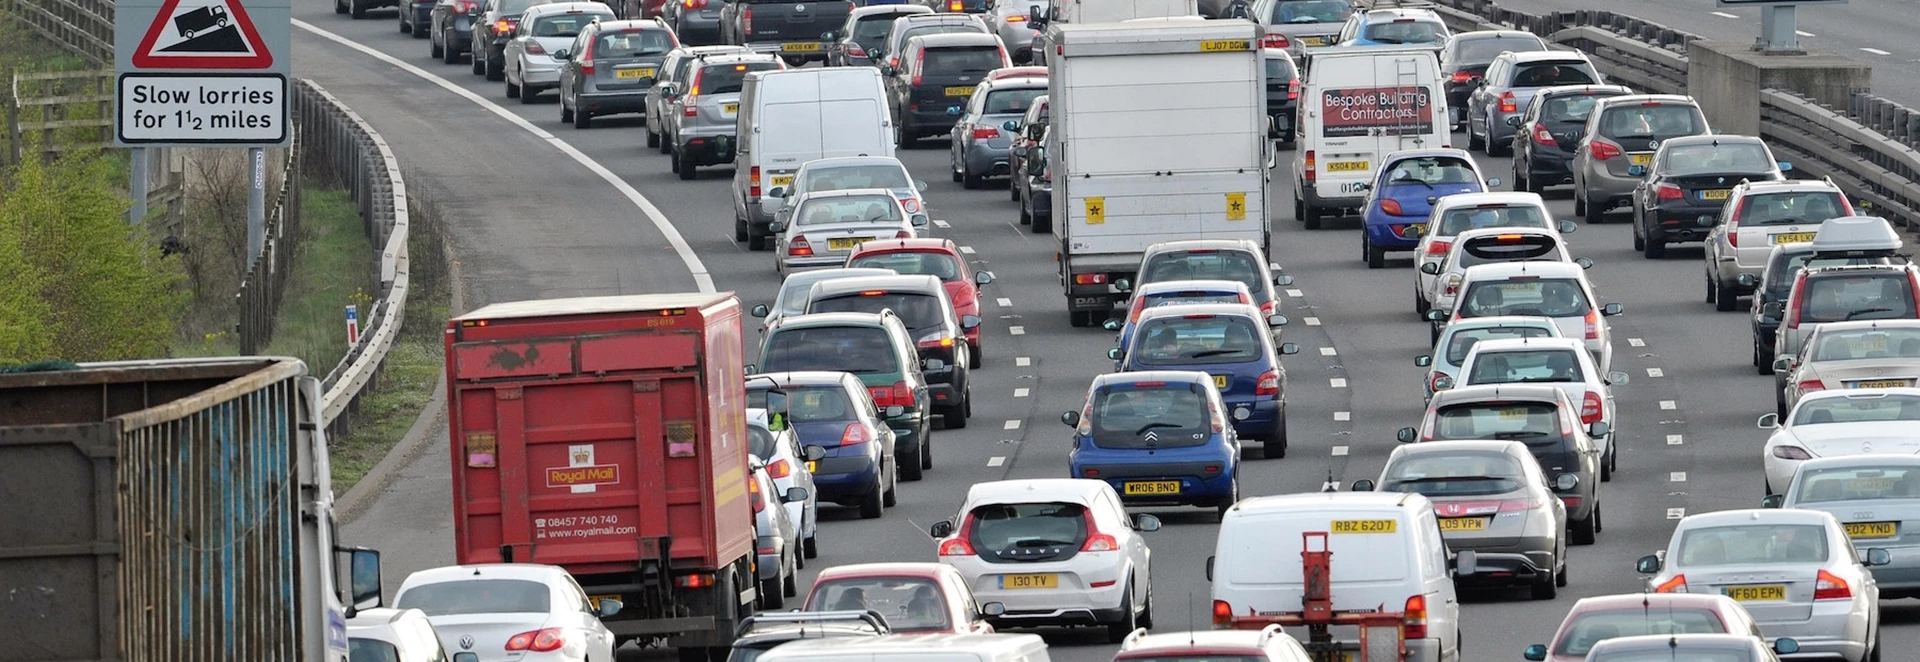 Traffic congestion cost the UK economy £6.9bn in 2019